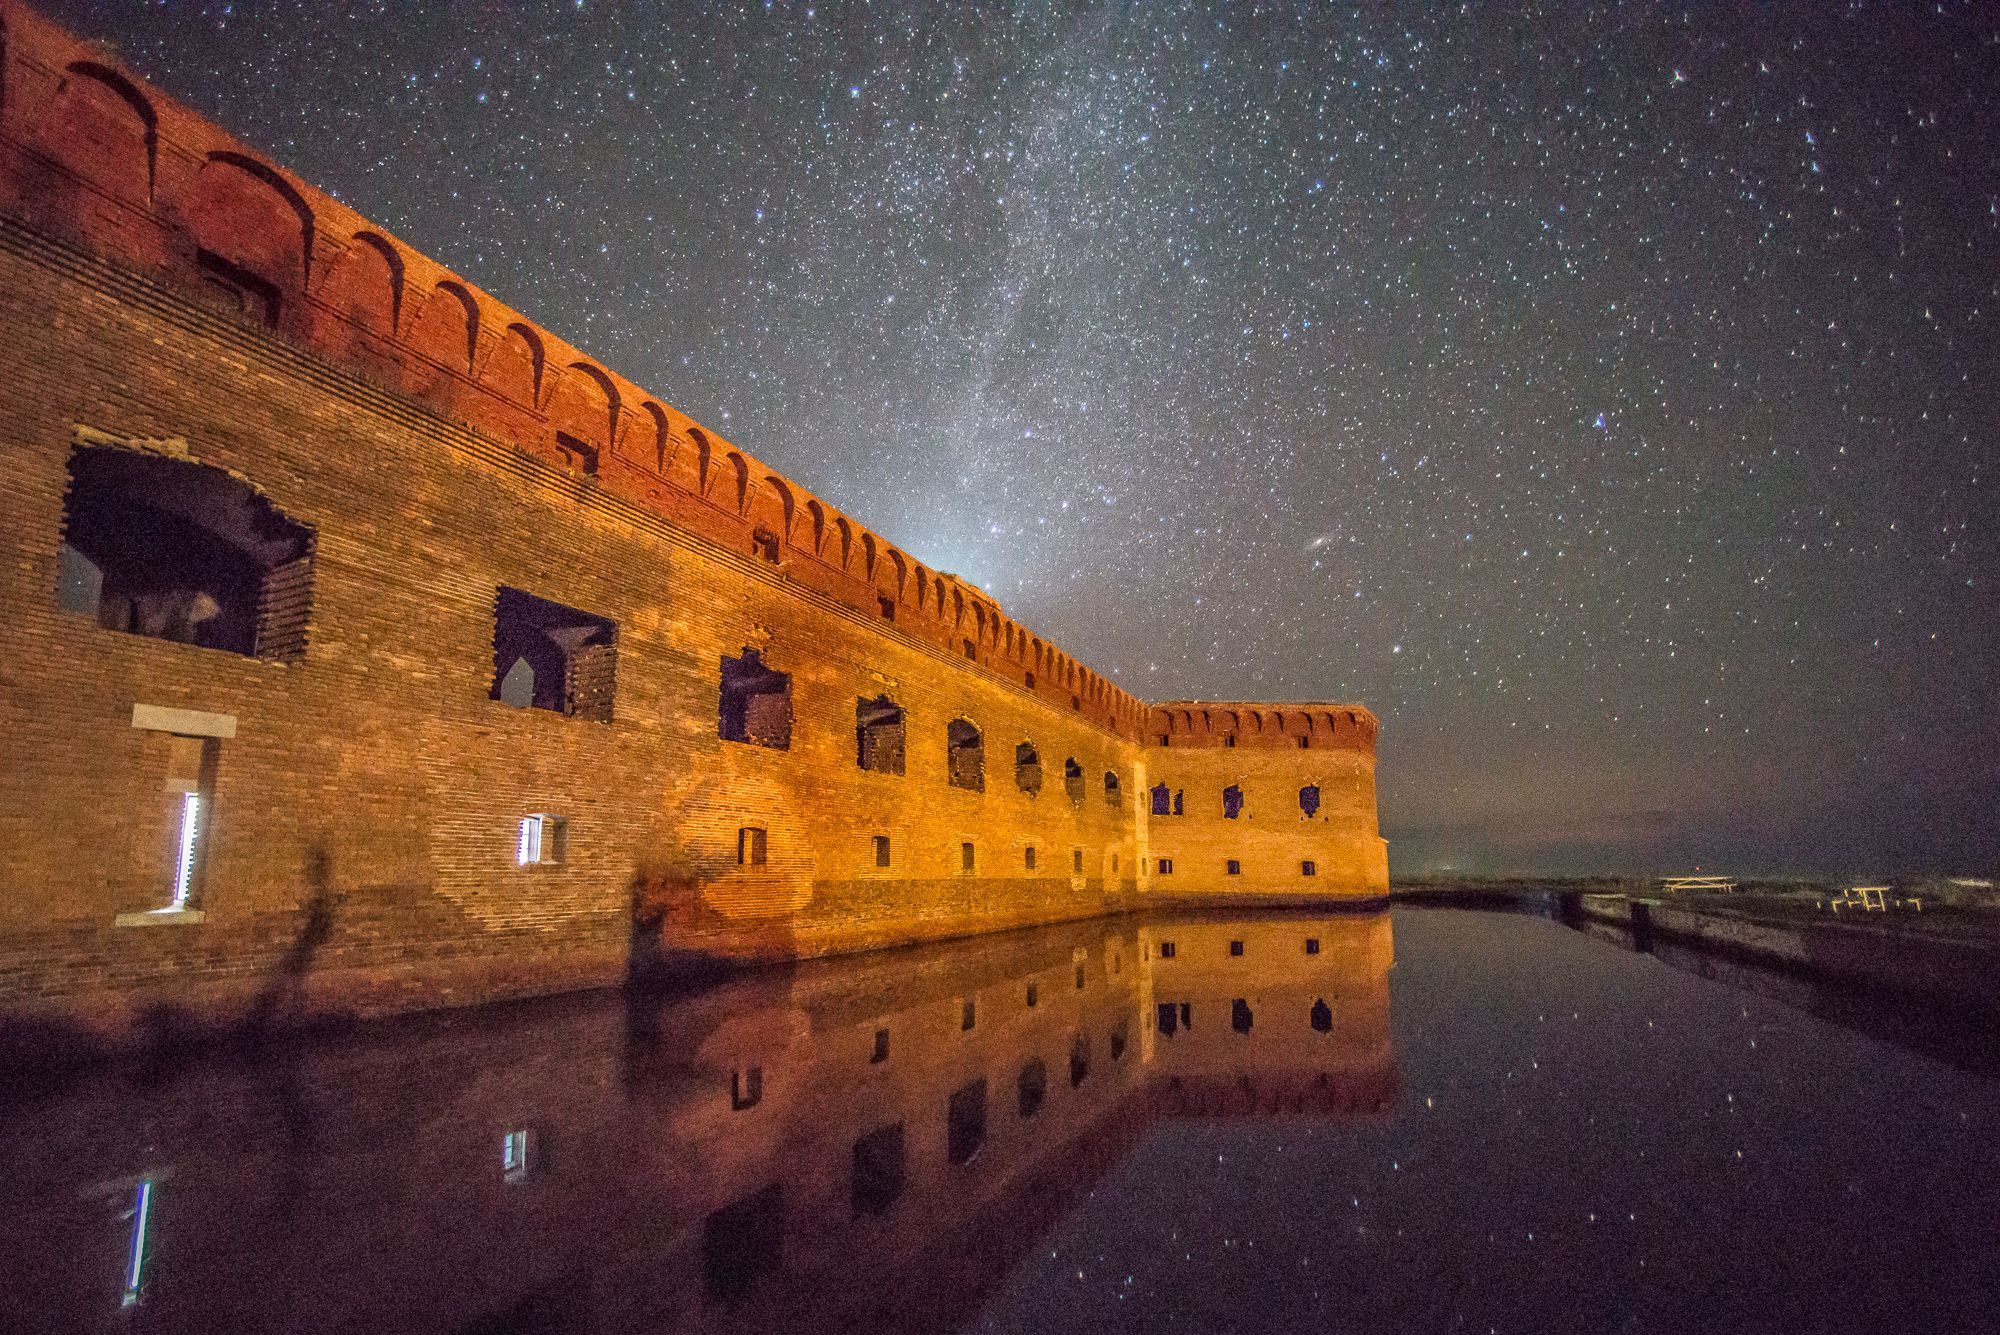 The Dry Tortugas is so remote that night sky viewing is possible.